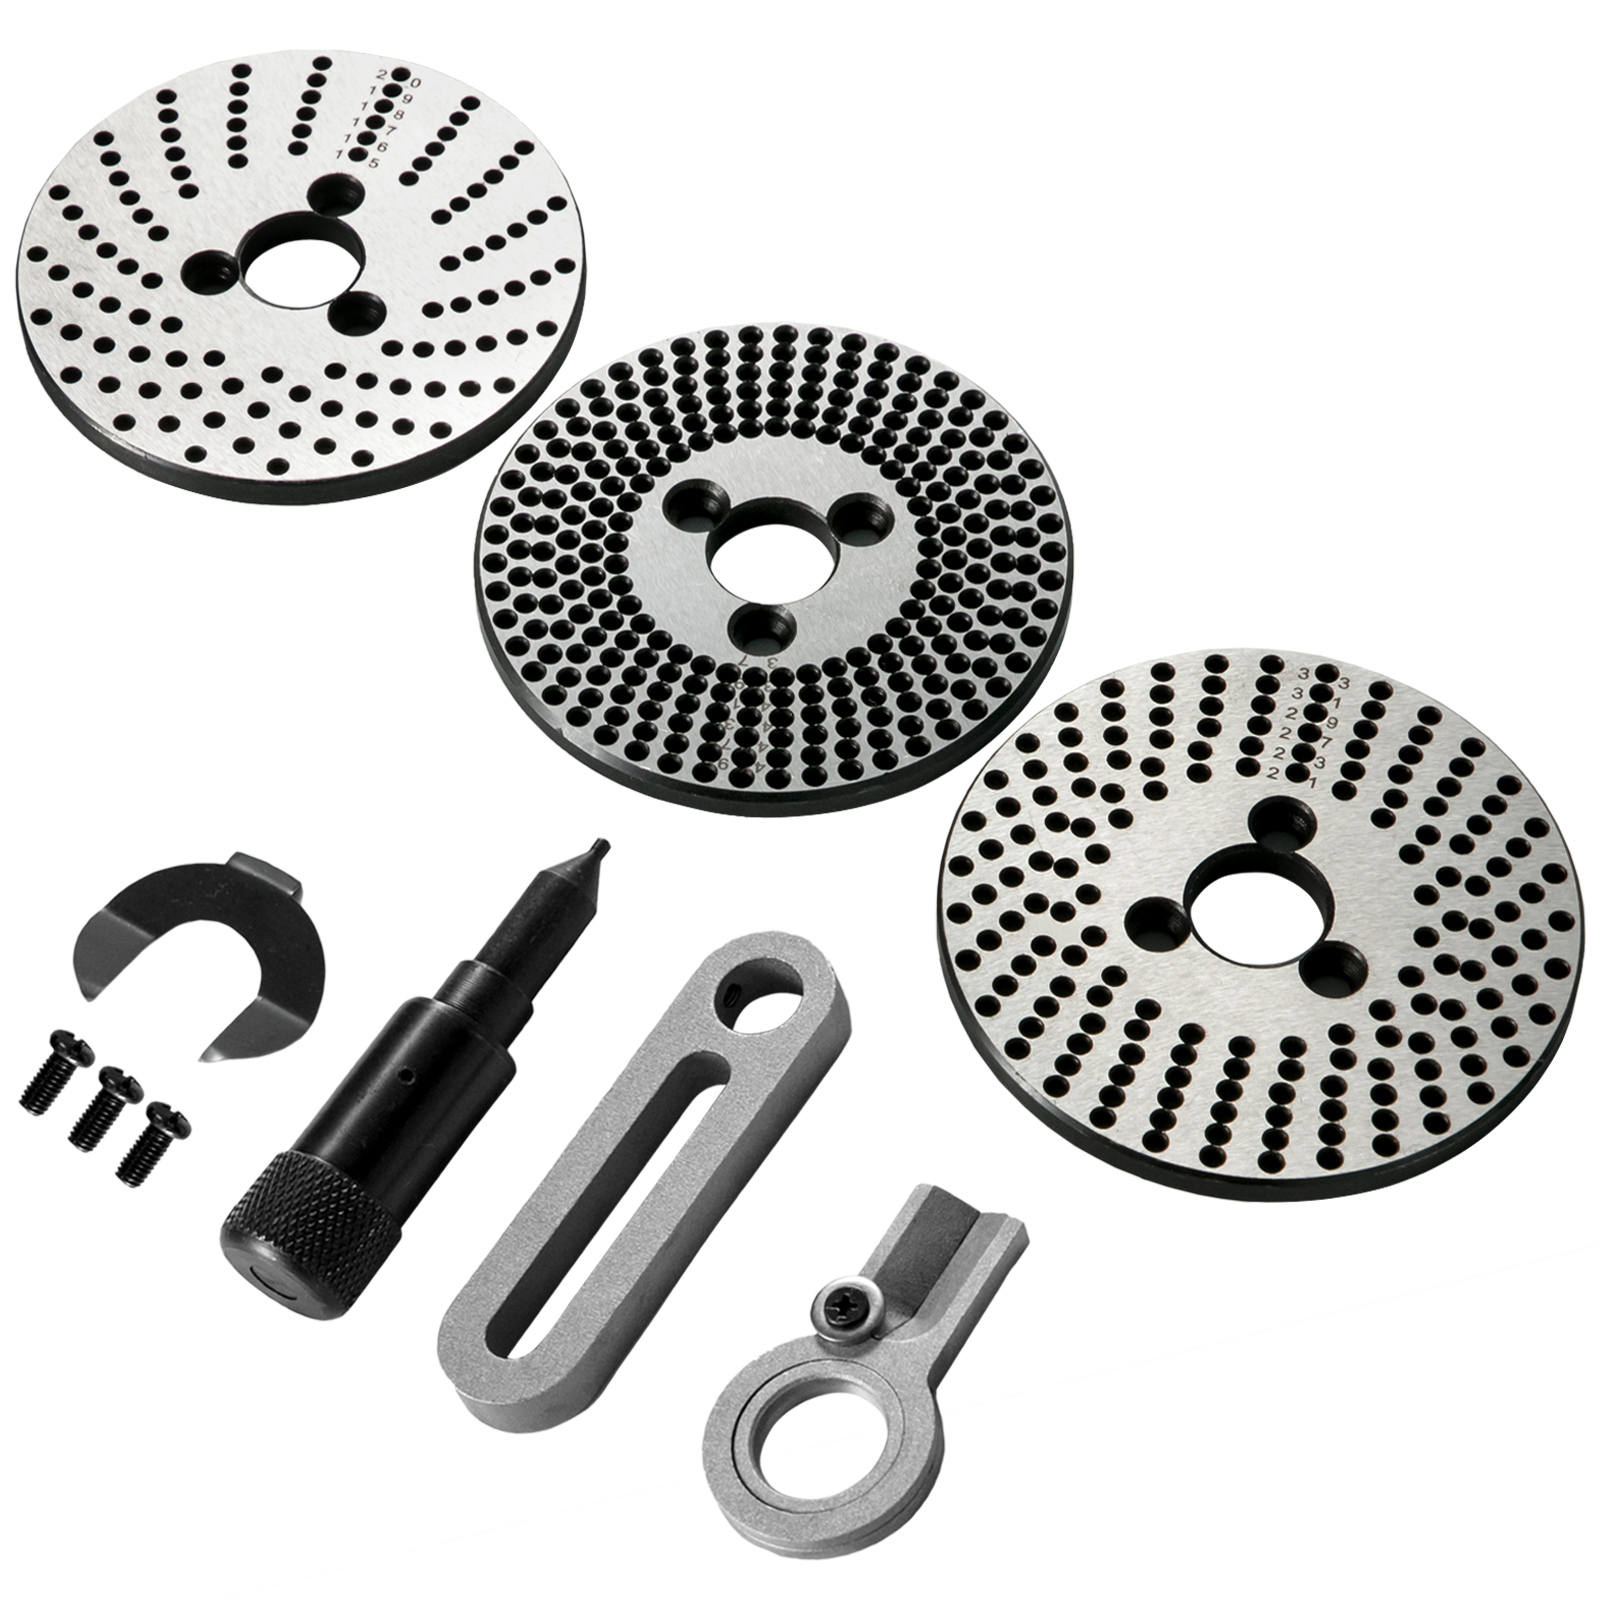 M8 CLAMPING KIT DIVIDING PLATE 100MM SELF CENTERING CHUCK ROTARY TABLE HV4 